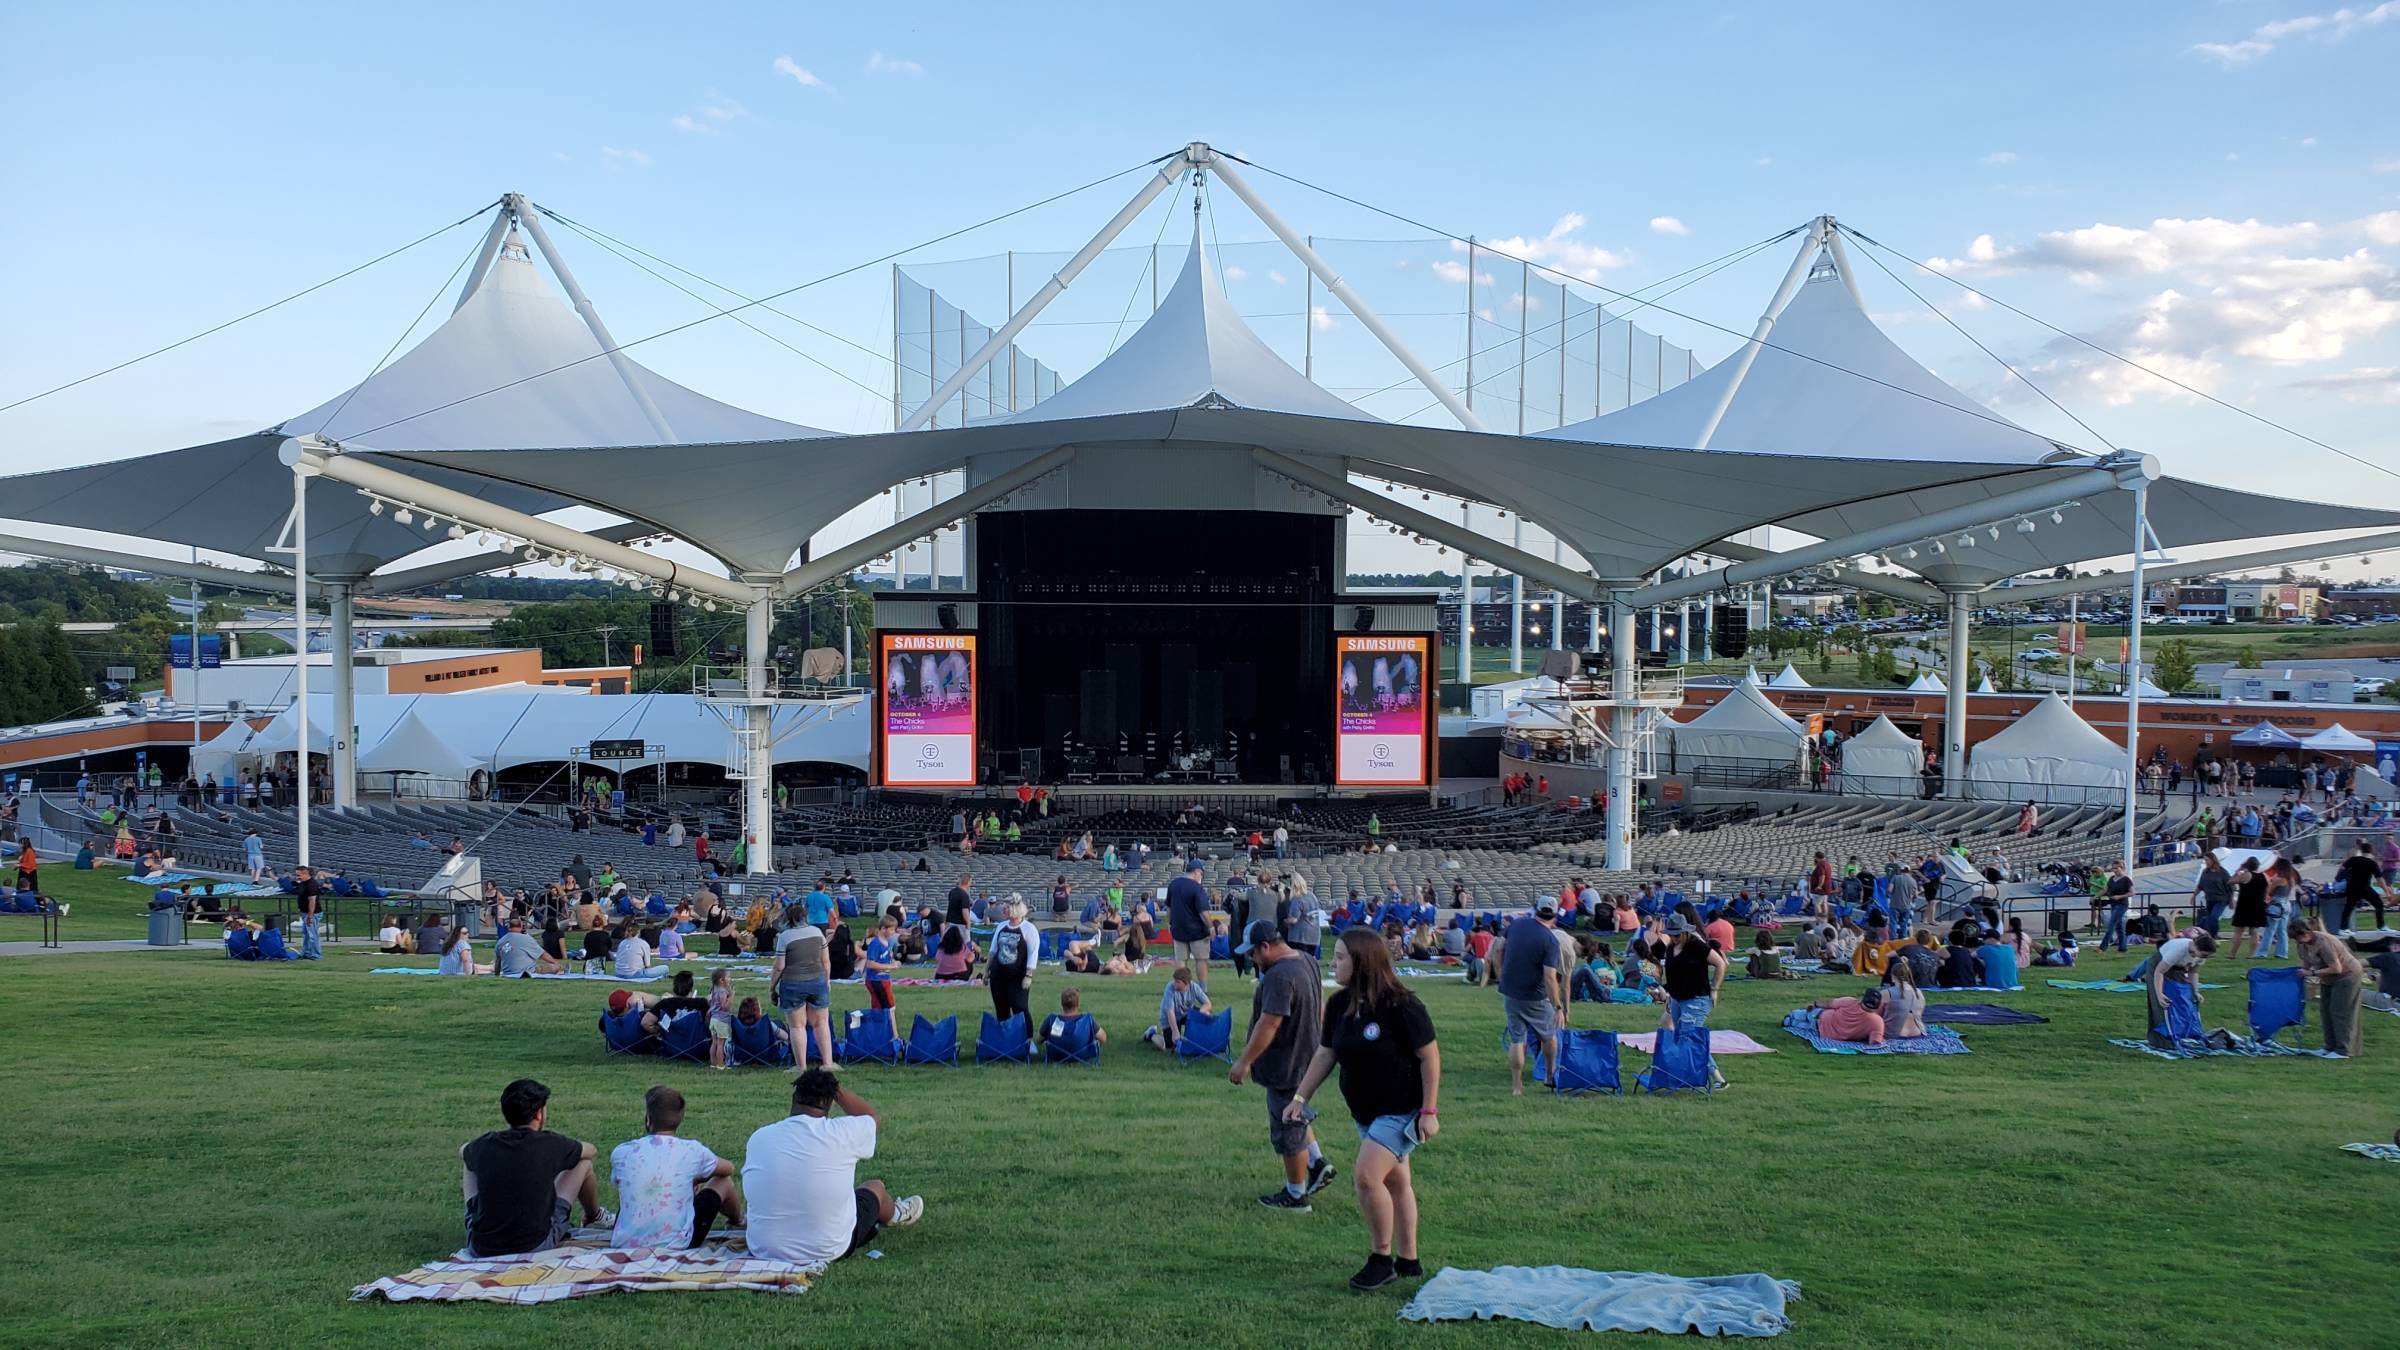 View of Walmart Amp from the Lawn Section